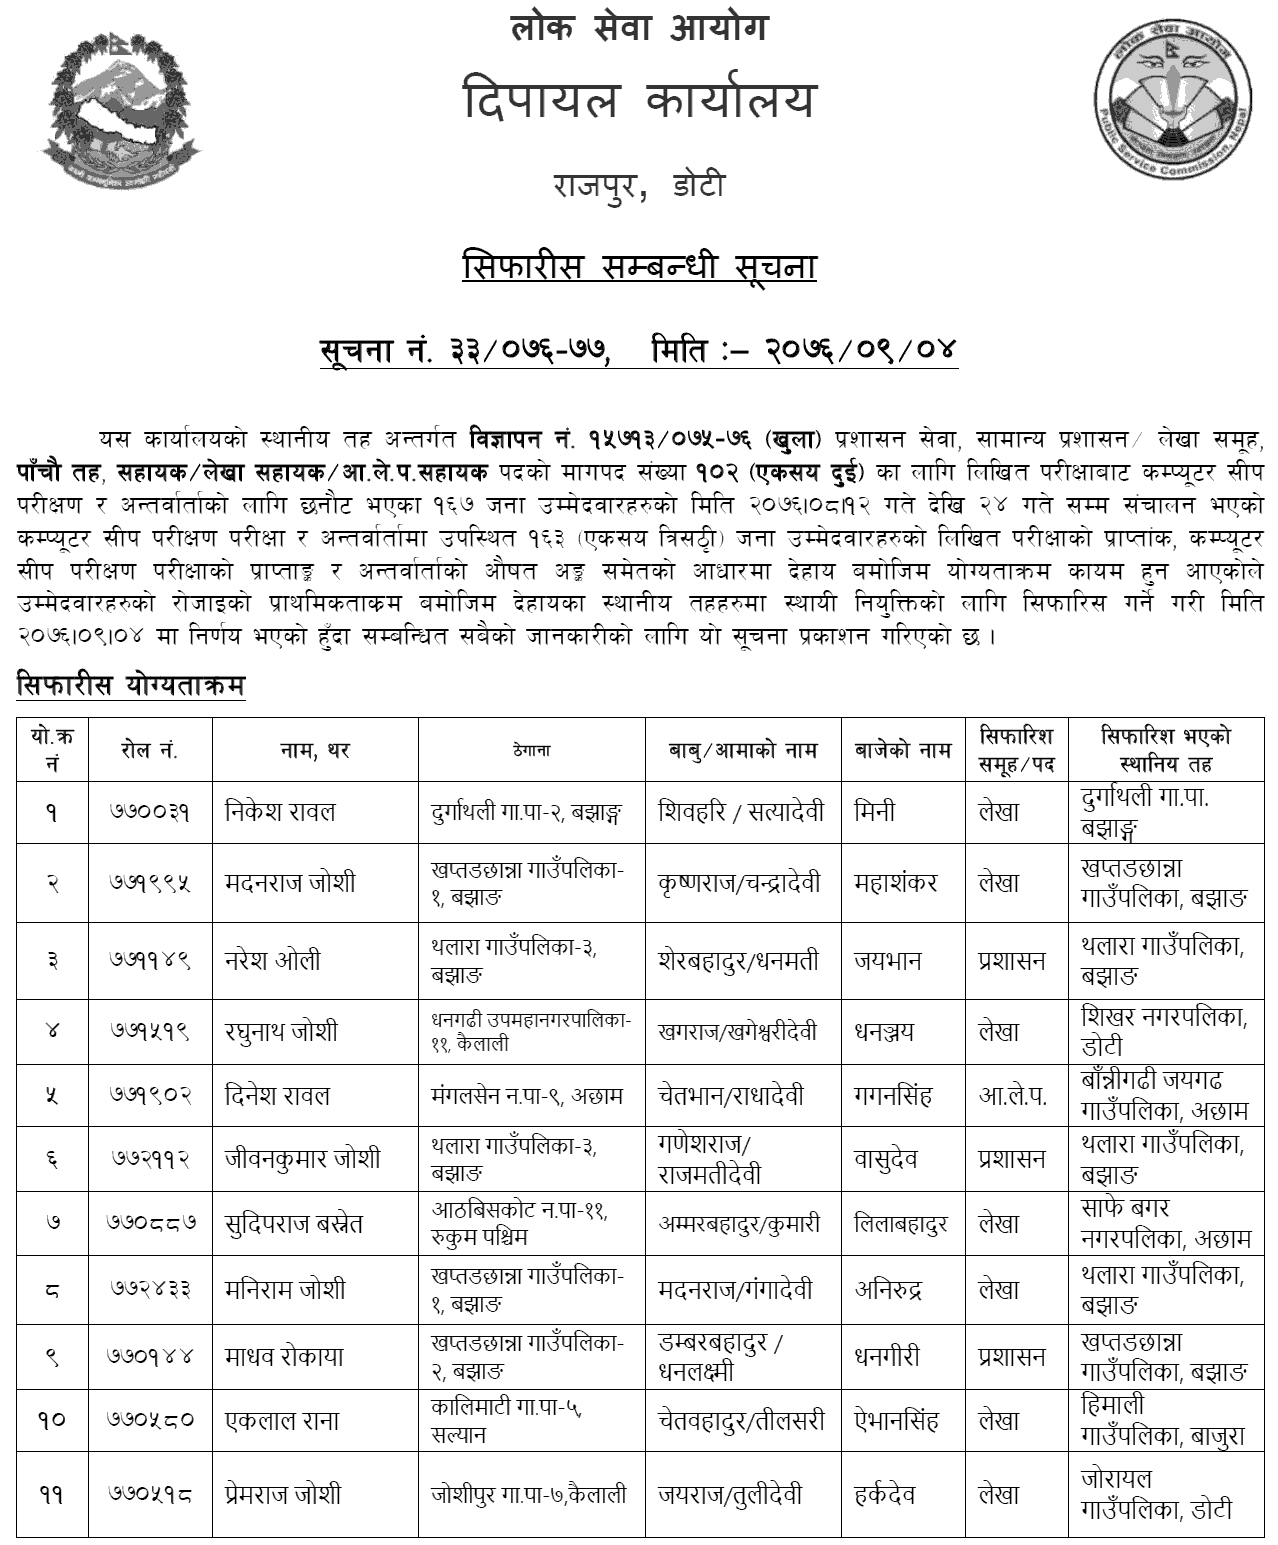 Lok Sewa Aayog Dipayal Local Level 5th Assistant Final Result and Appointment